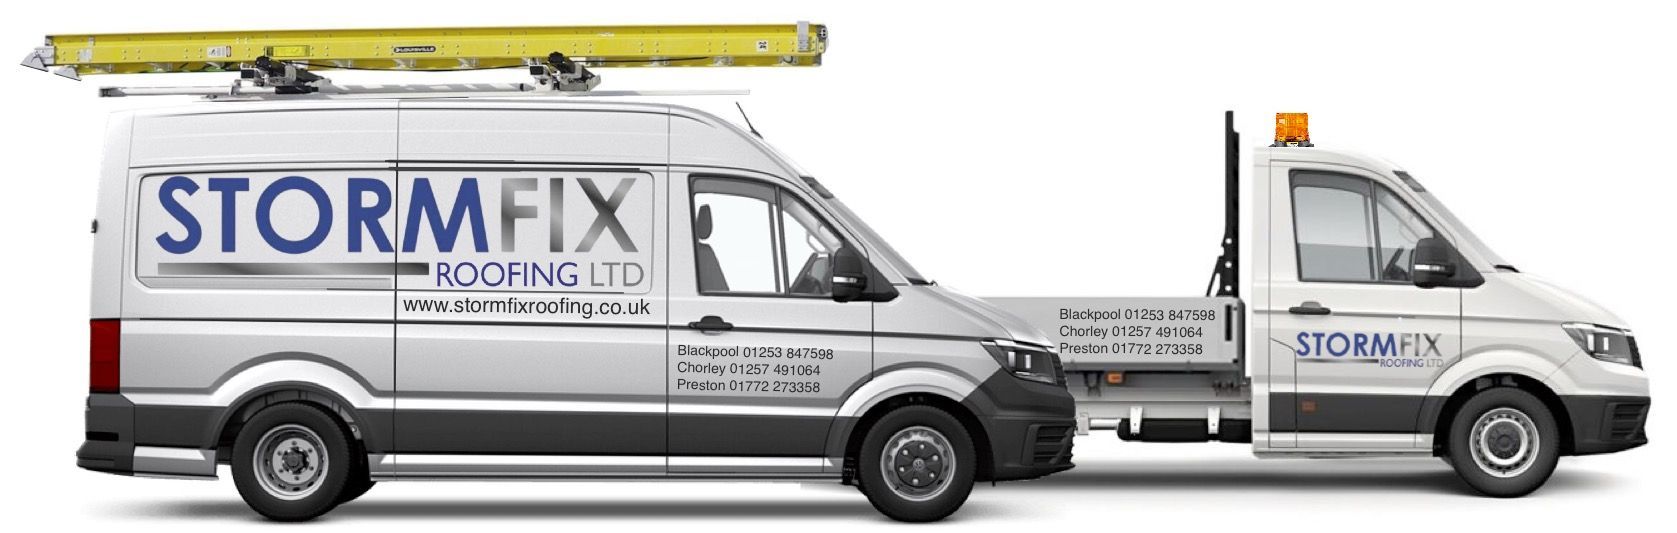 Stormfix Roofing Limited Preston deliver quality roofing services in Preston and the south Lancashire area.